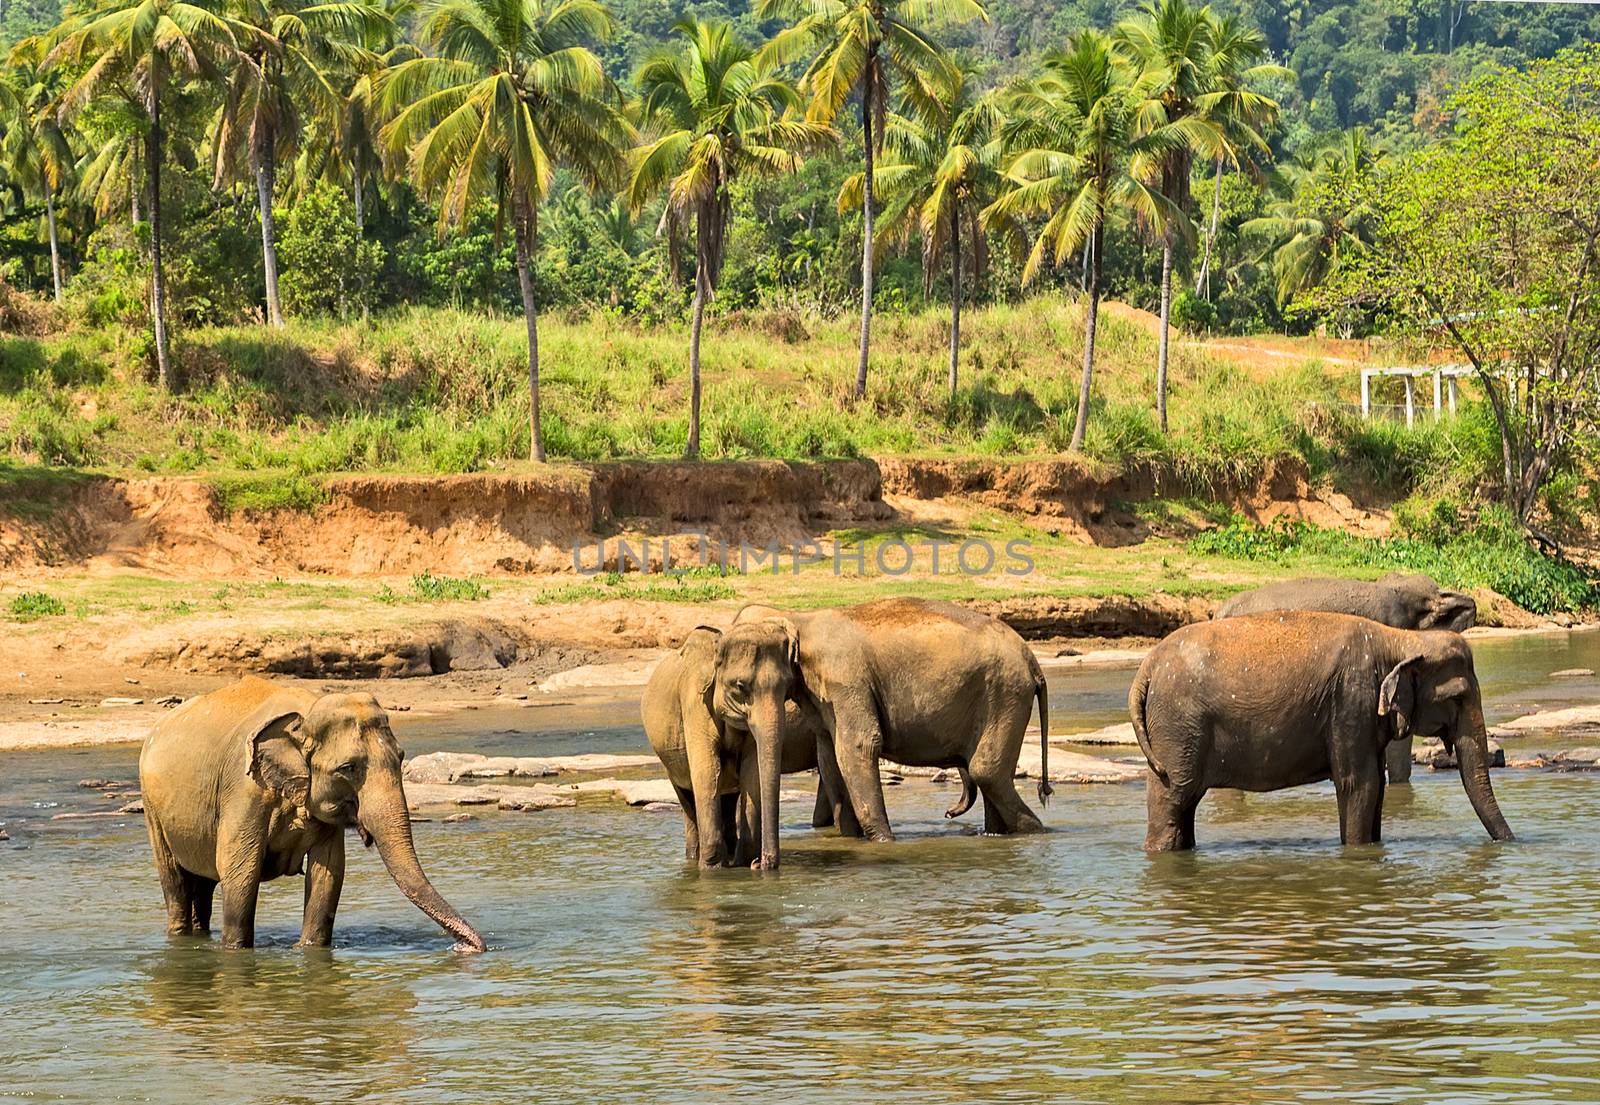 elephant in jungle river washing outdoor leisure.